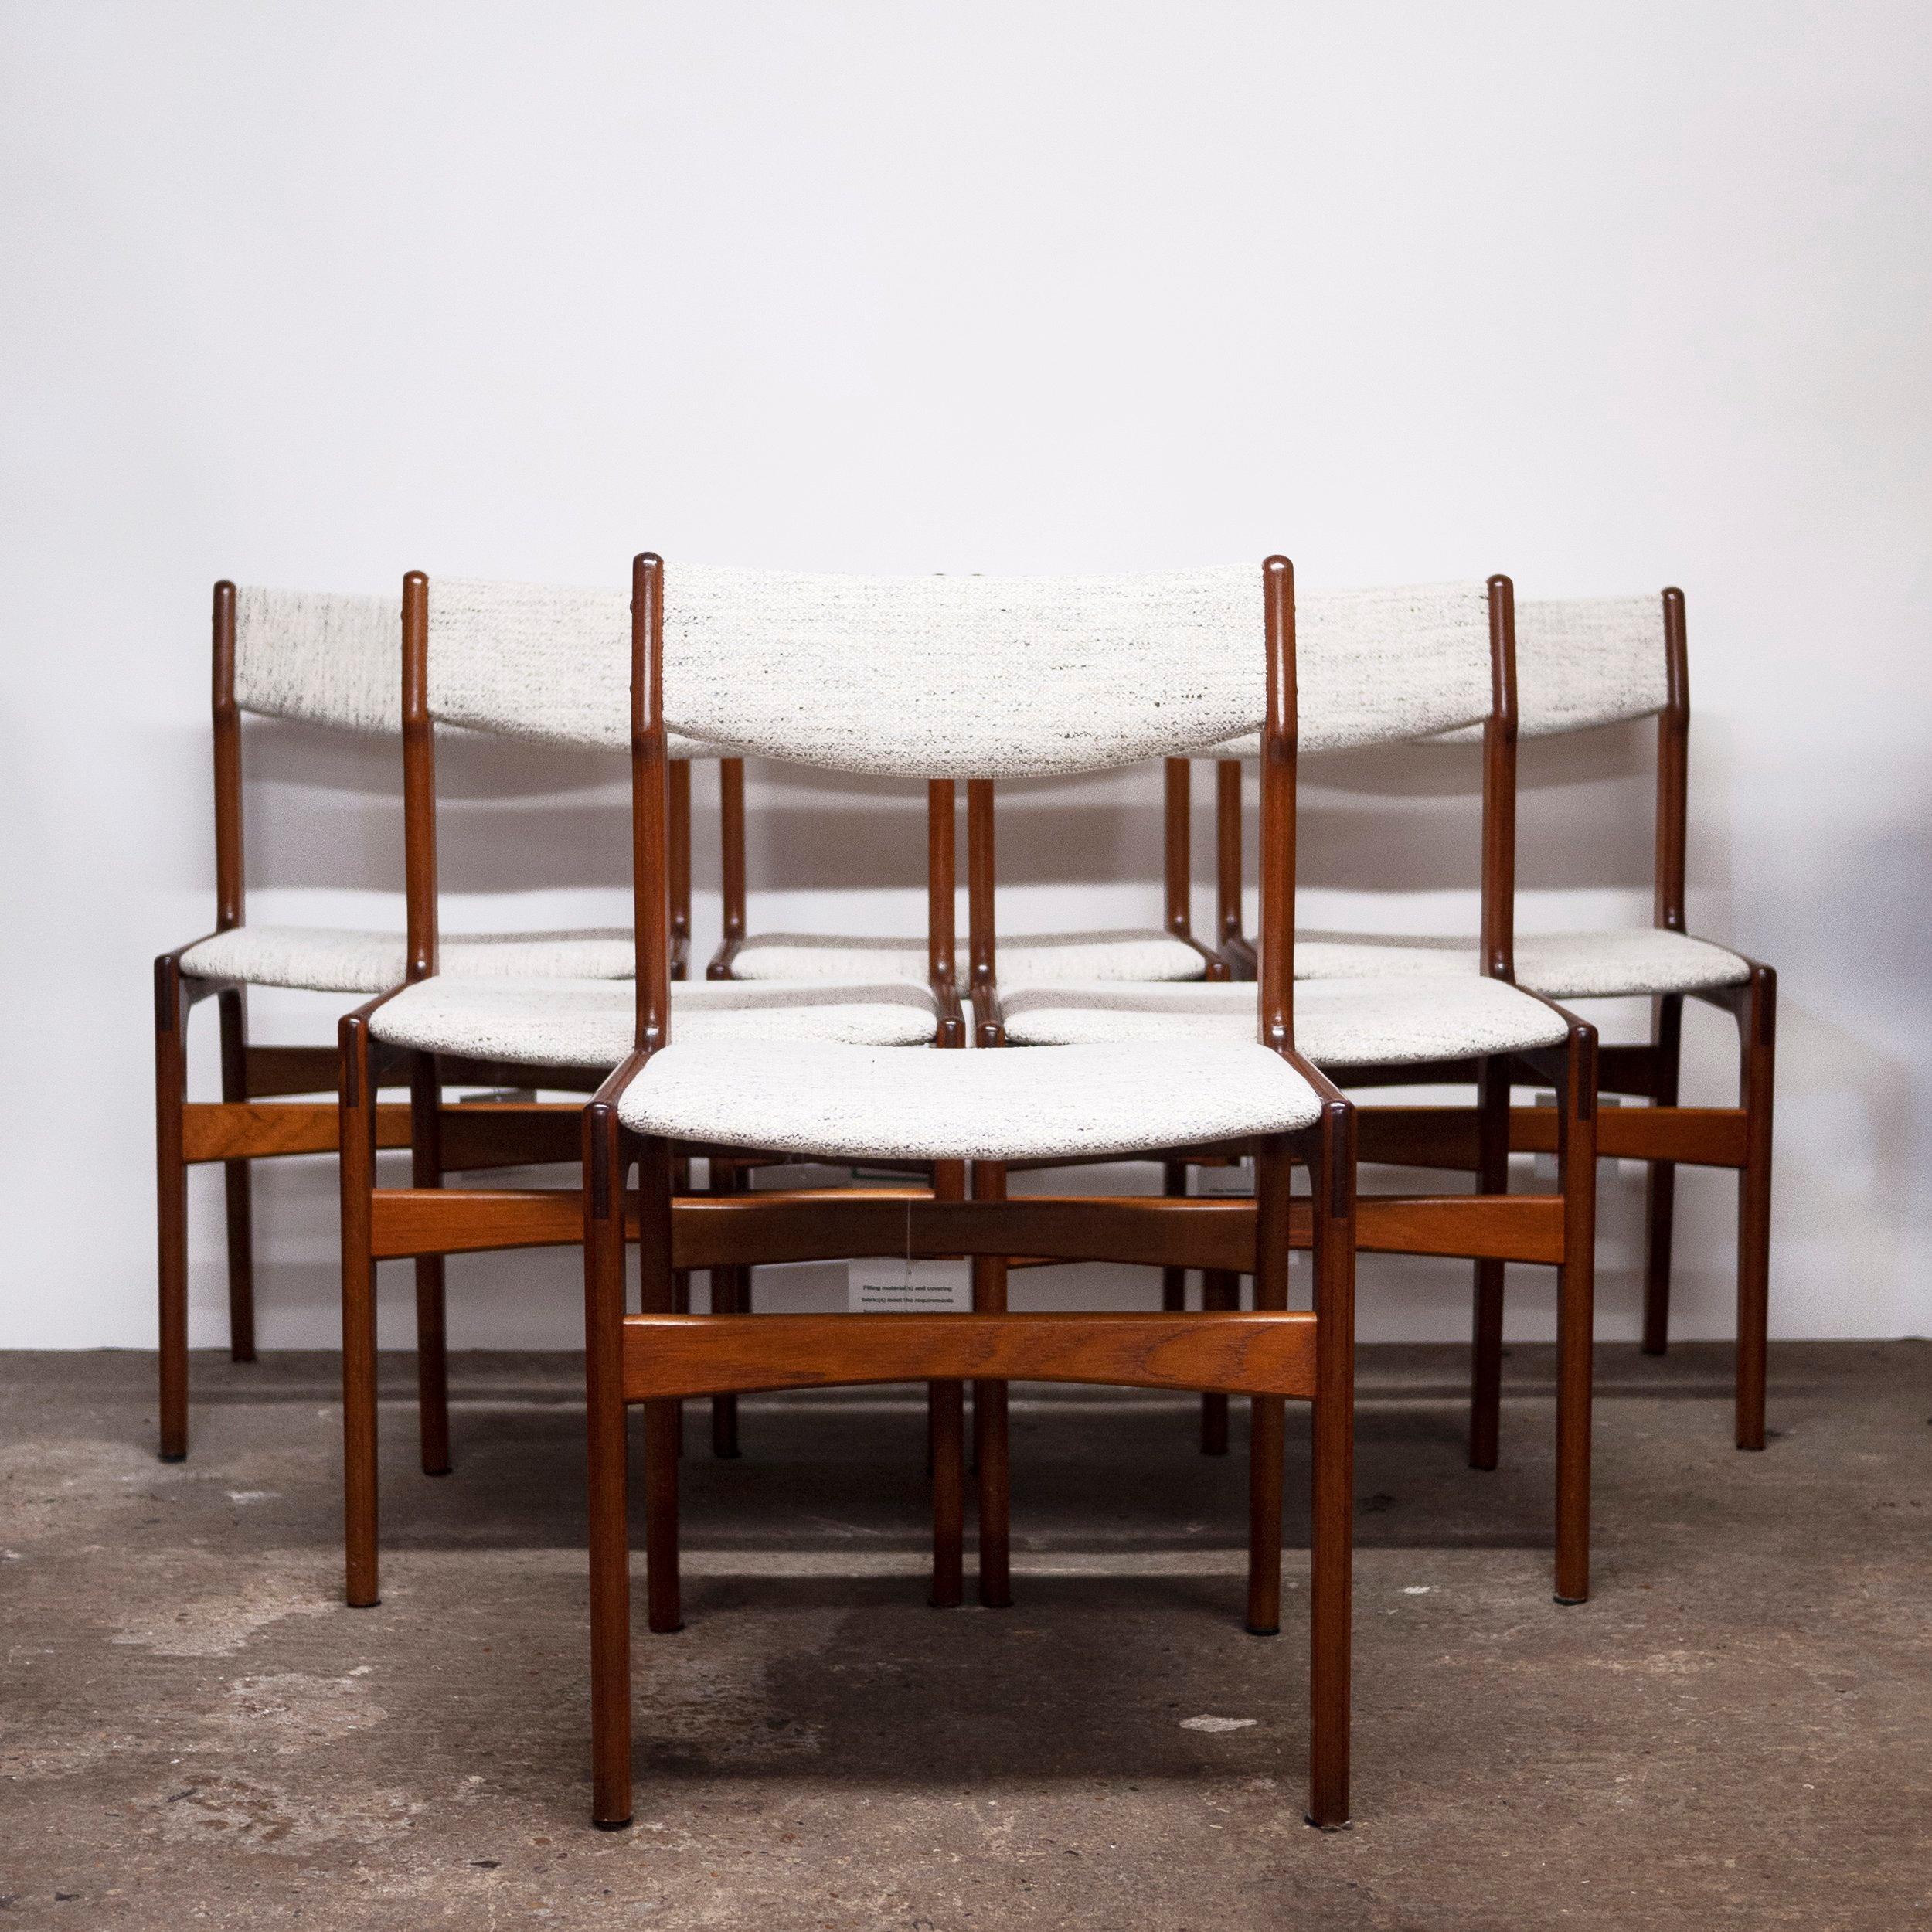 A set of 6 Danish dining chairs produced by Anderstrup Stolefabrik. The chairs feature a new salt and pepper boucle upholstery.

Manufacturer - Anderstrup Stolefabrik

Design Period - 1960 to 1969

Style - Vintage, Mid-Century

Detailed Condition -